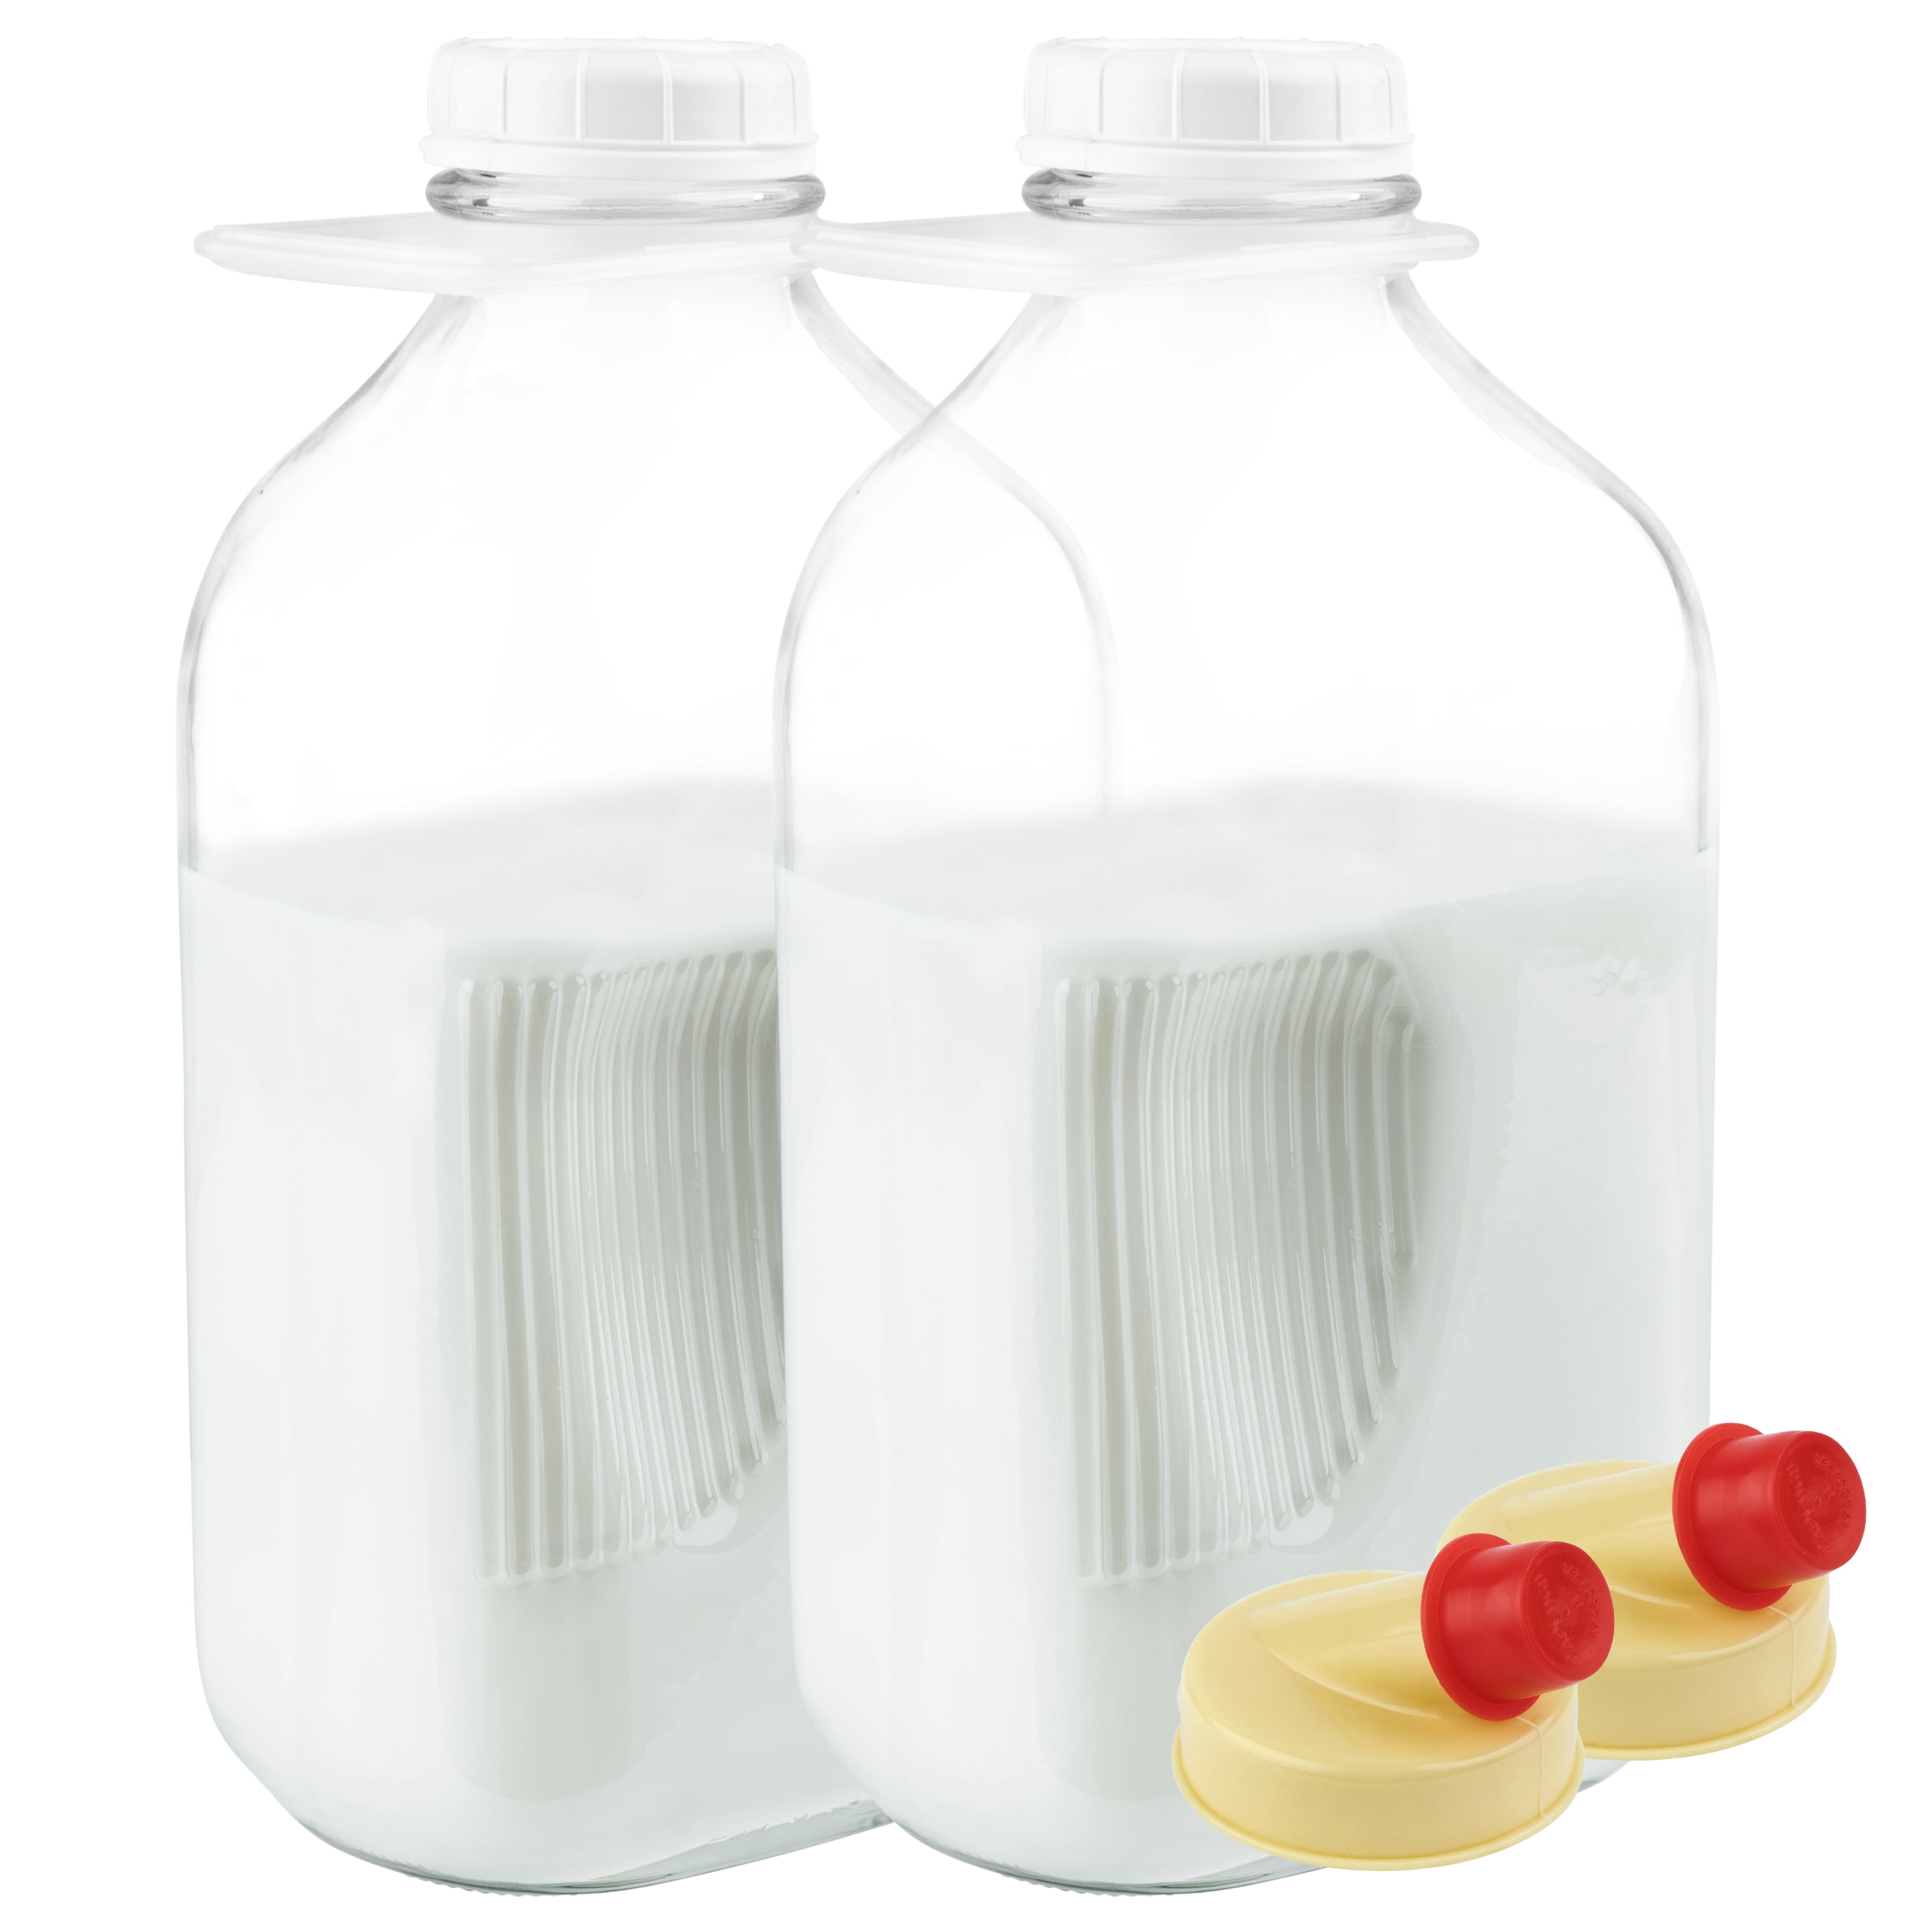 Kitchentoolz 32 Oz Square Glass Milk Bottles with Lids, Perfect Glass Milk  Container for Refrigerato…See more Kitchentoolz 32 Oz Square Glass Milk